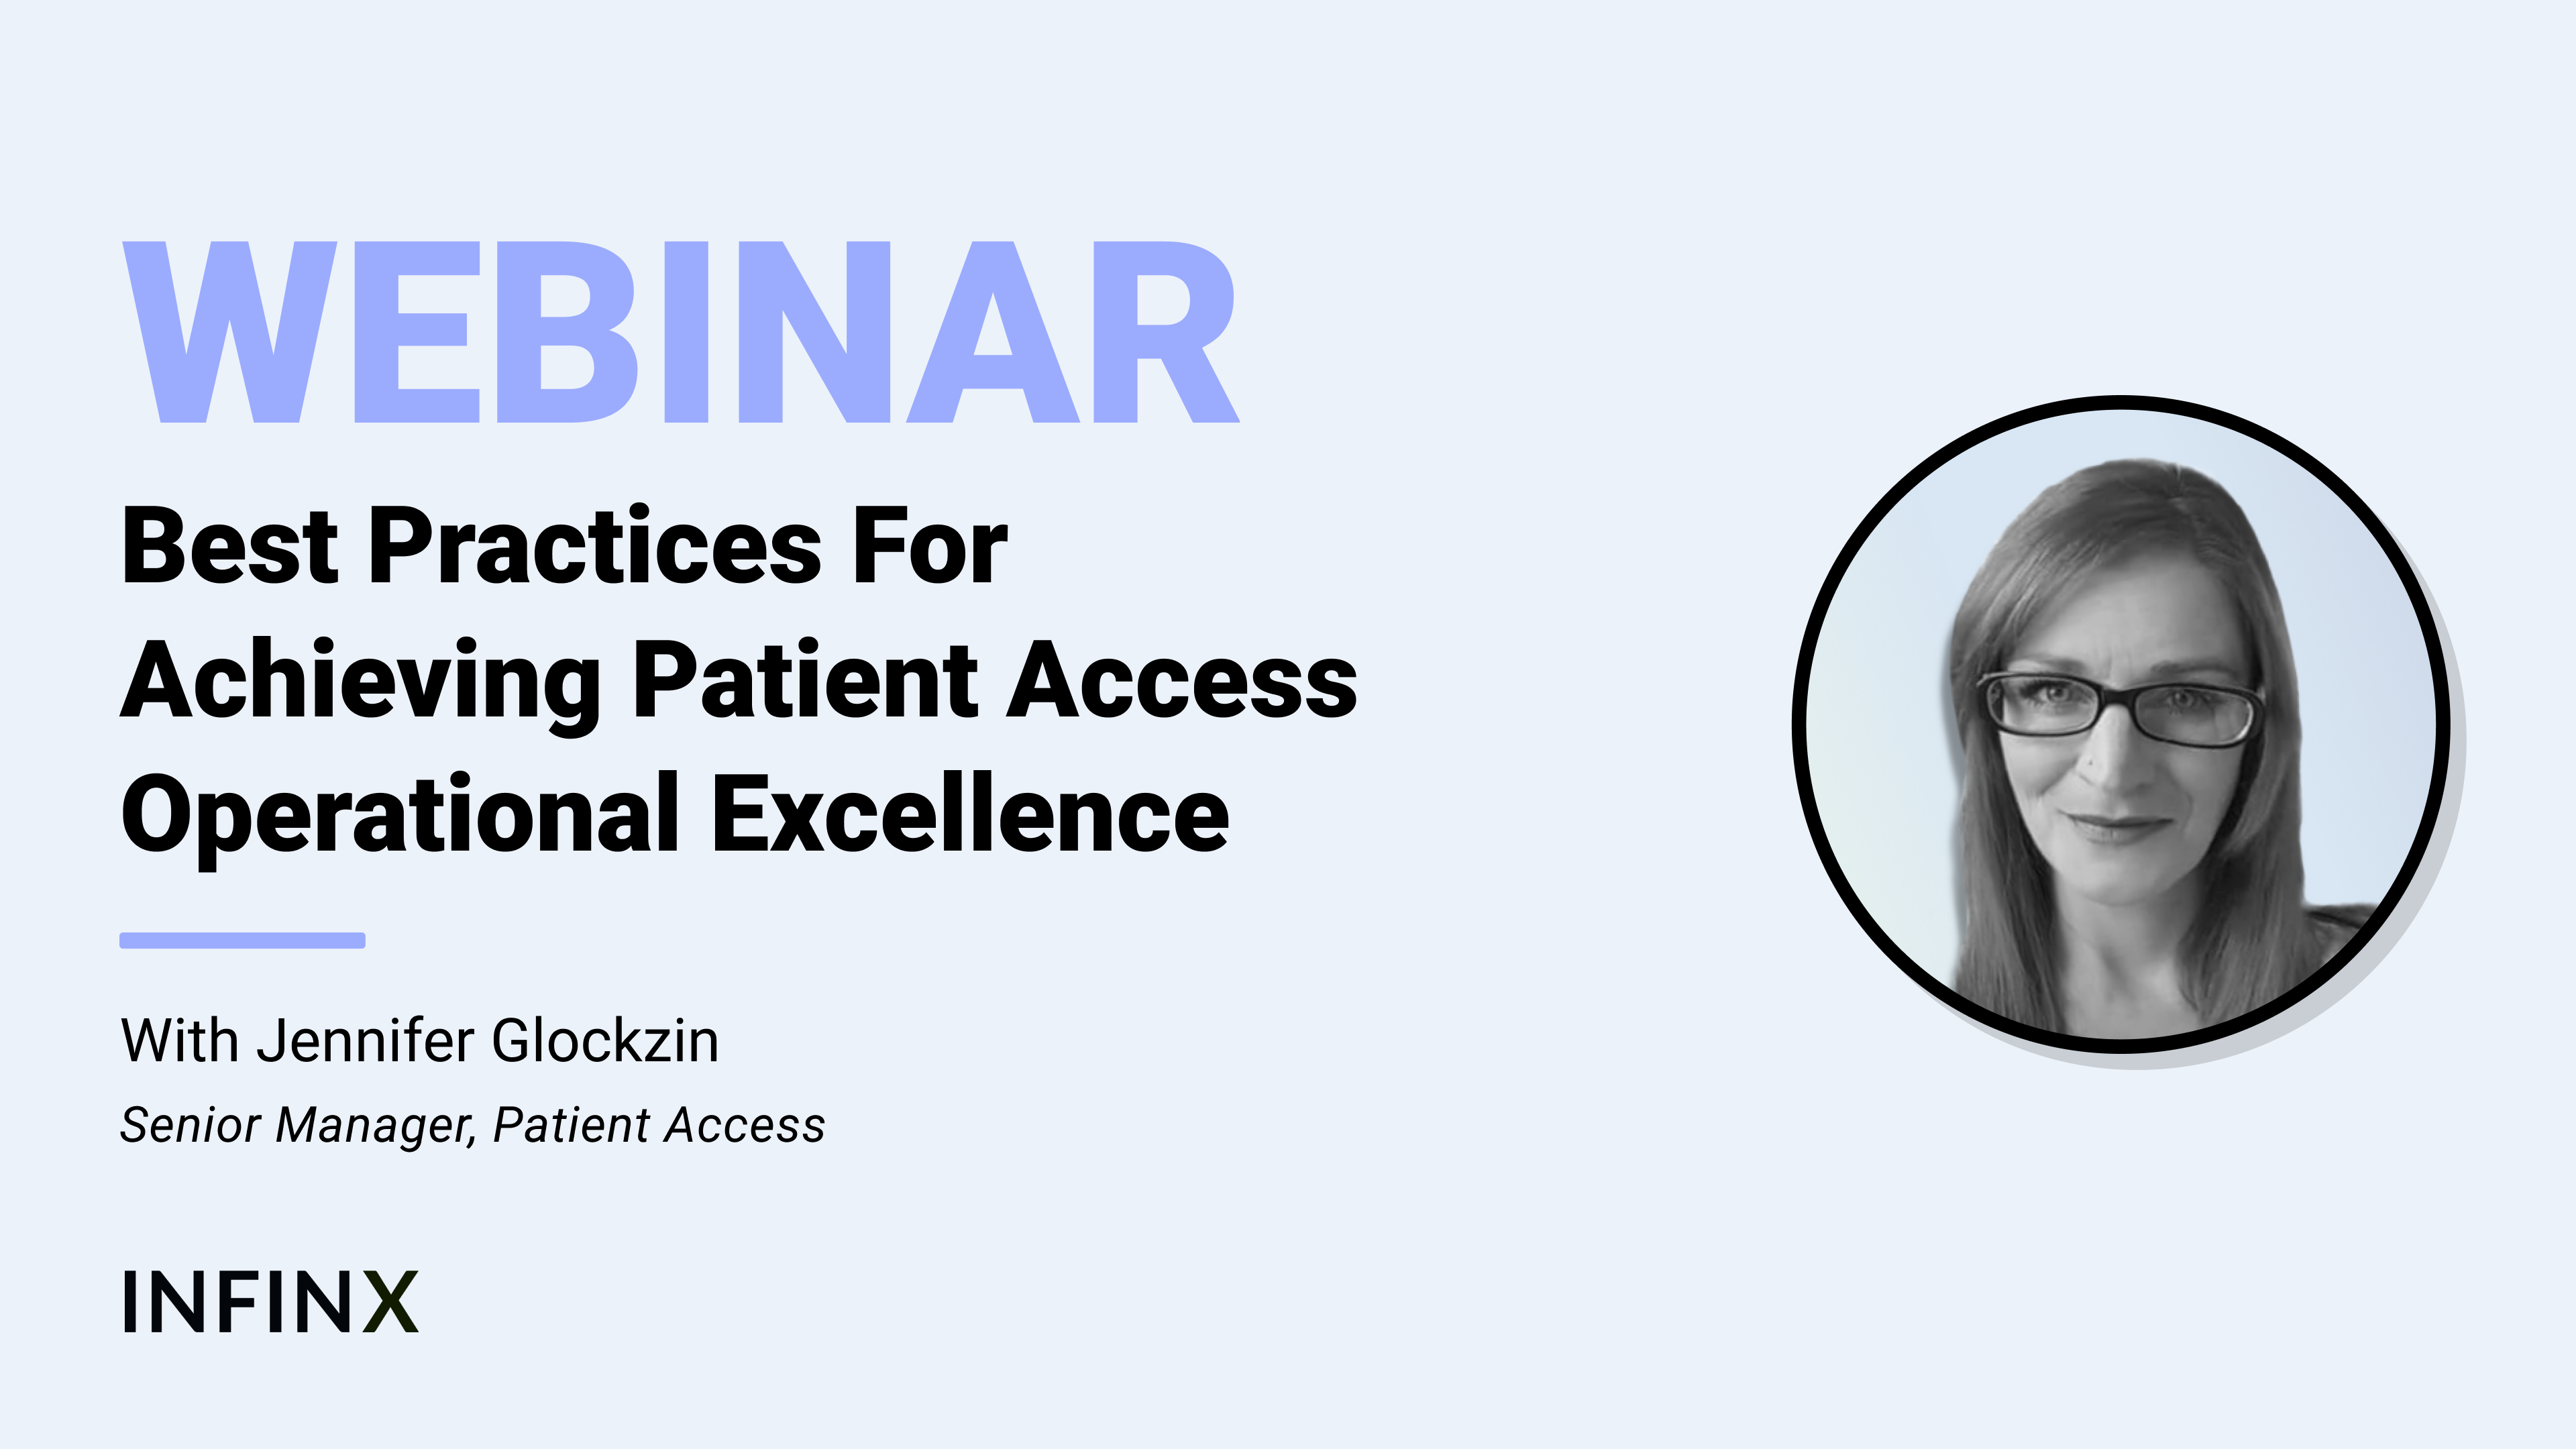 Best Practices For Achieving Patient Access Operational Excellence With Senior Manager For Patient Access Jennifer Glockzin Infinx Office Hours Revenue Cycle Optimized